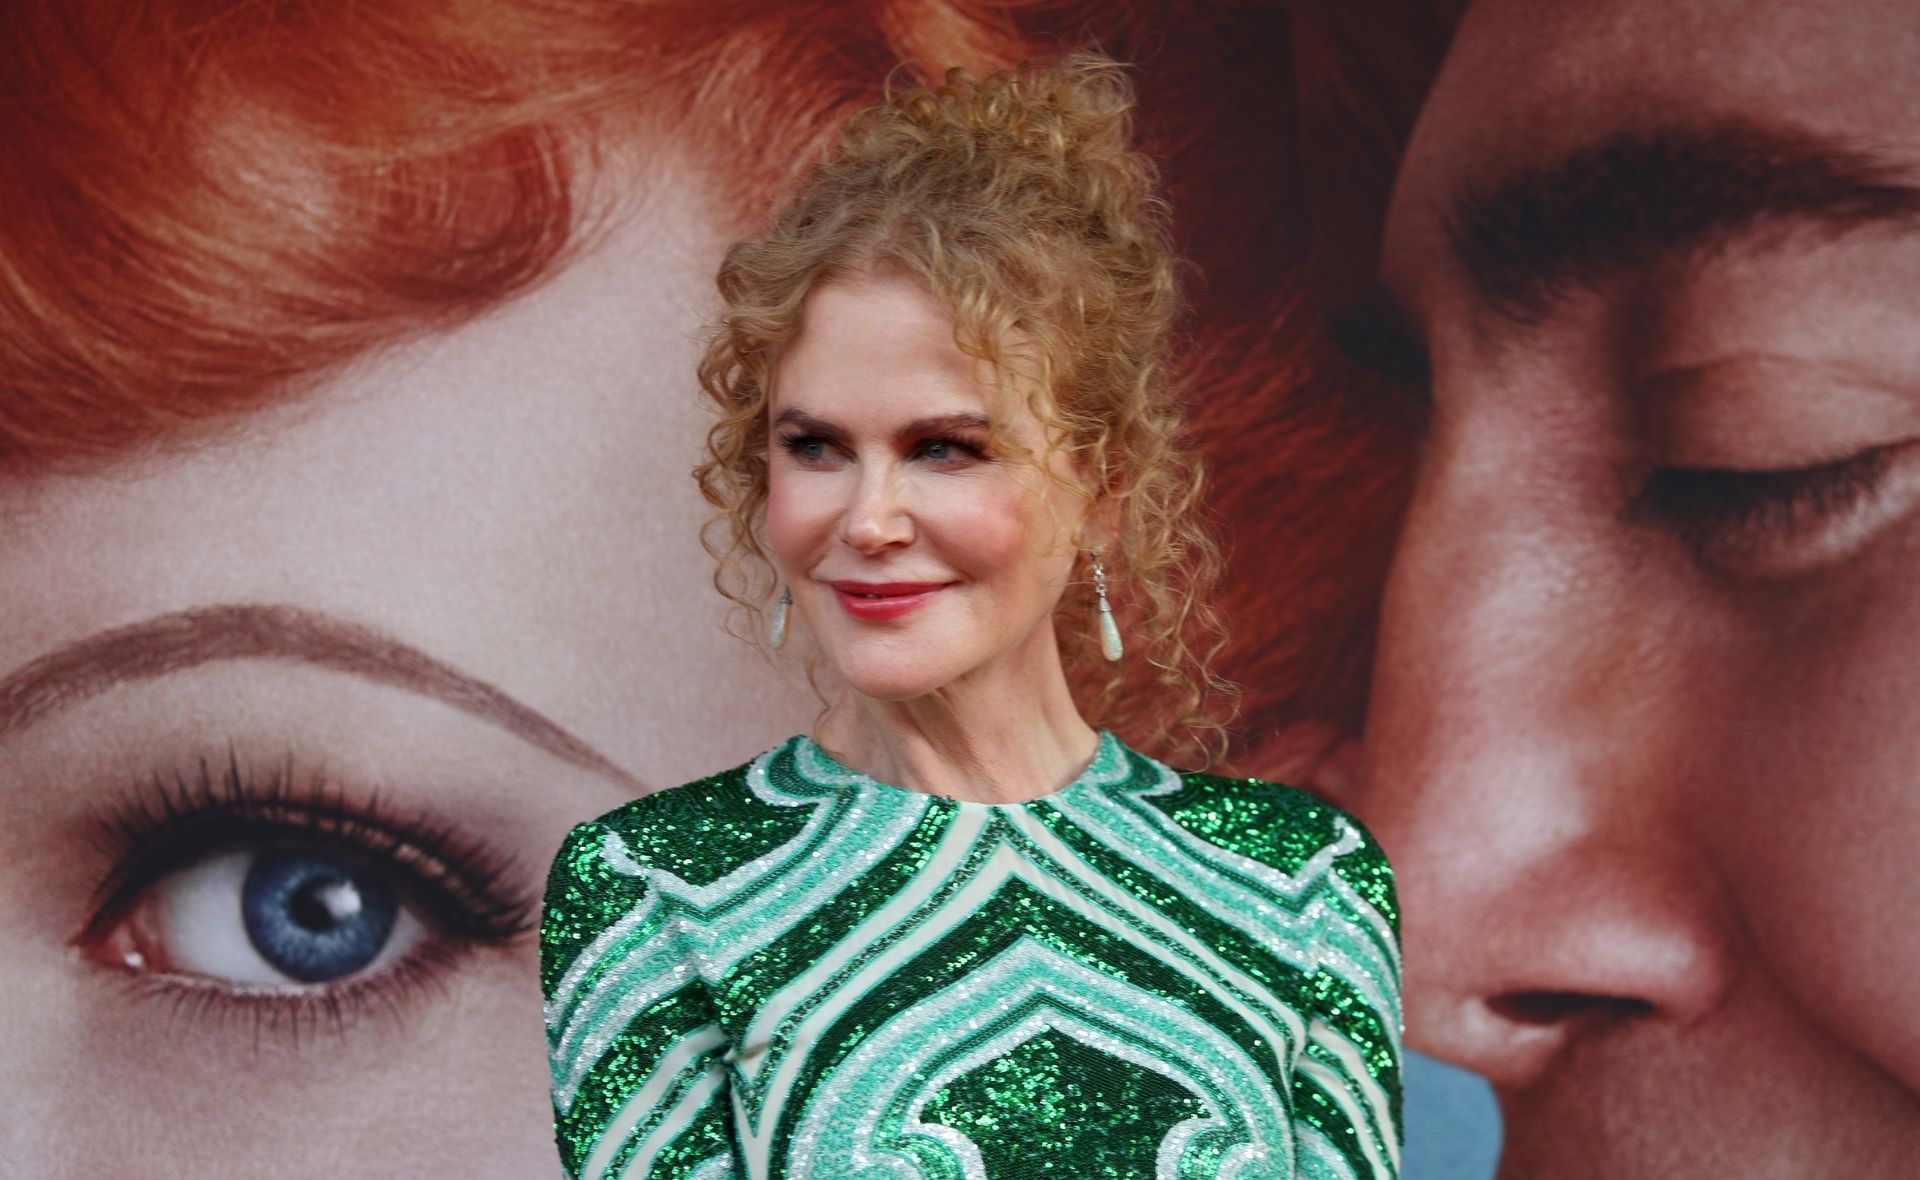 Nicole Kidman reveals she is in Australia to take care of her unwell mother, Janelle